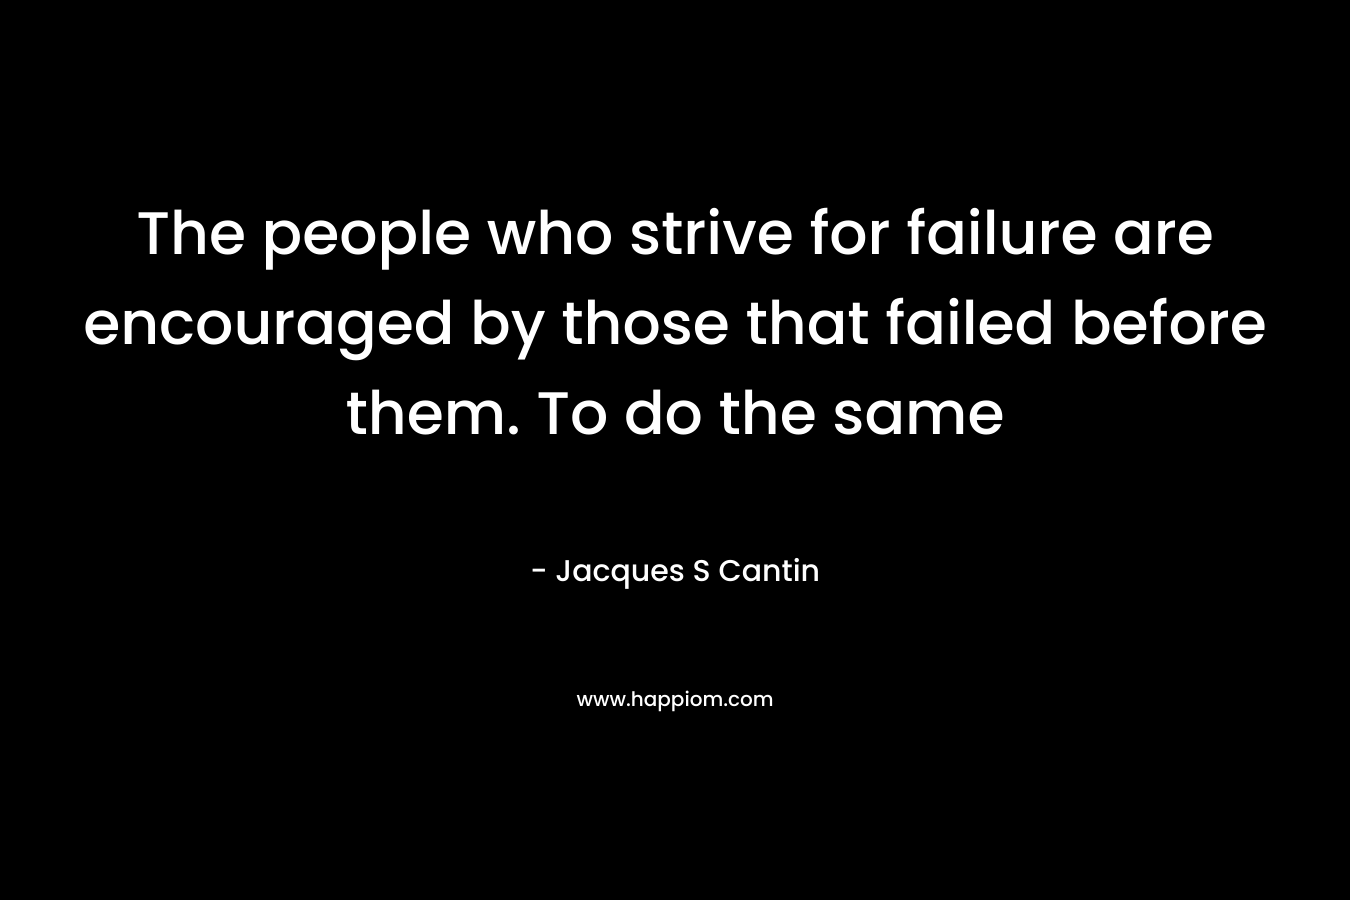 The people who strive for failure are encouraged by those that failed before them. To do the same – Jacques S Cantin